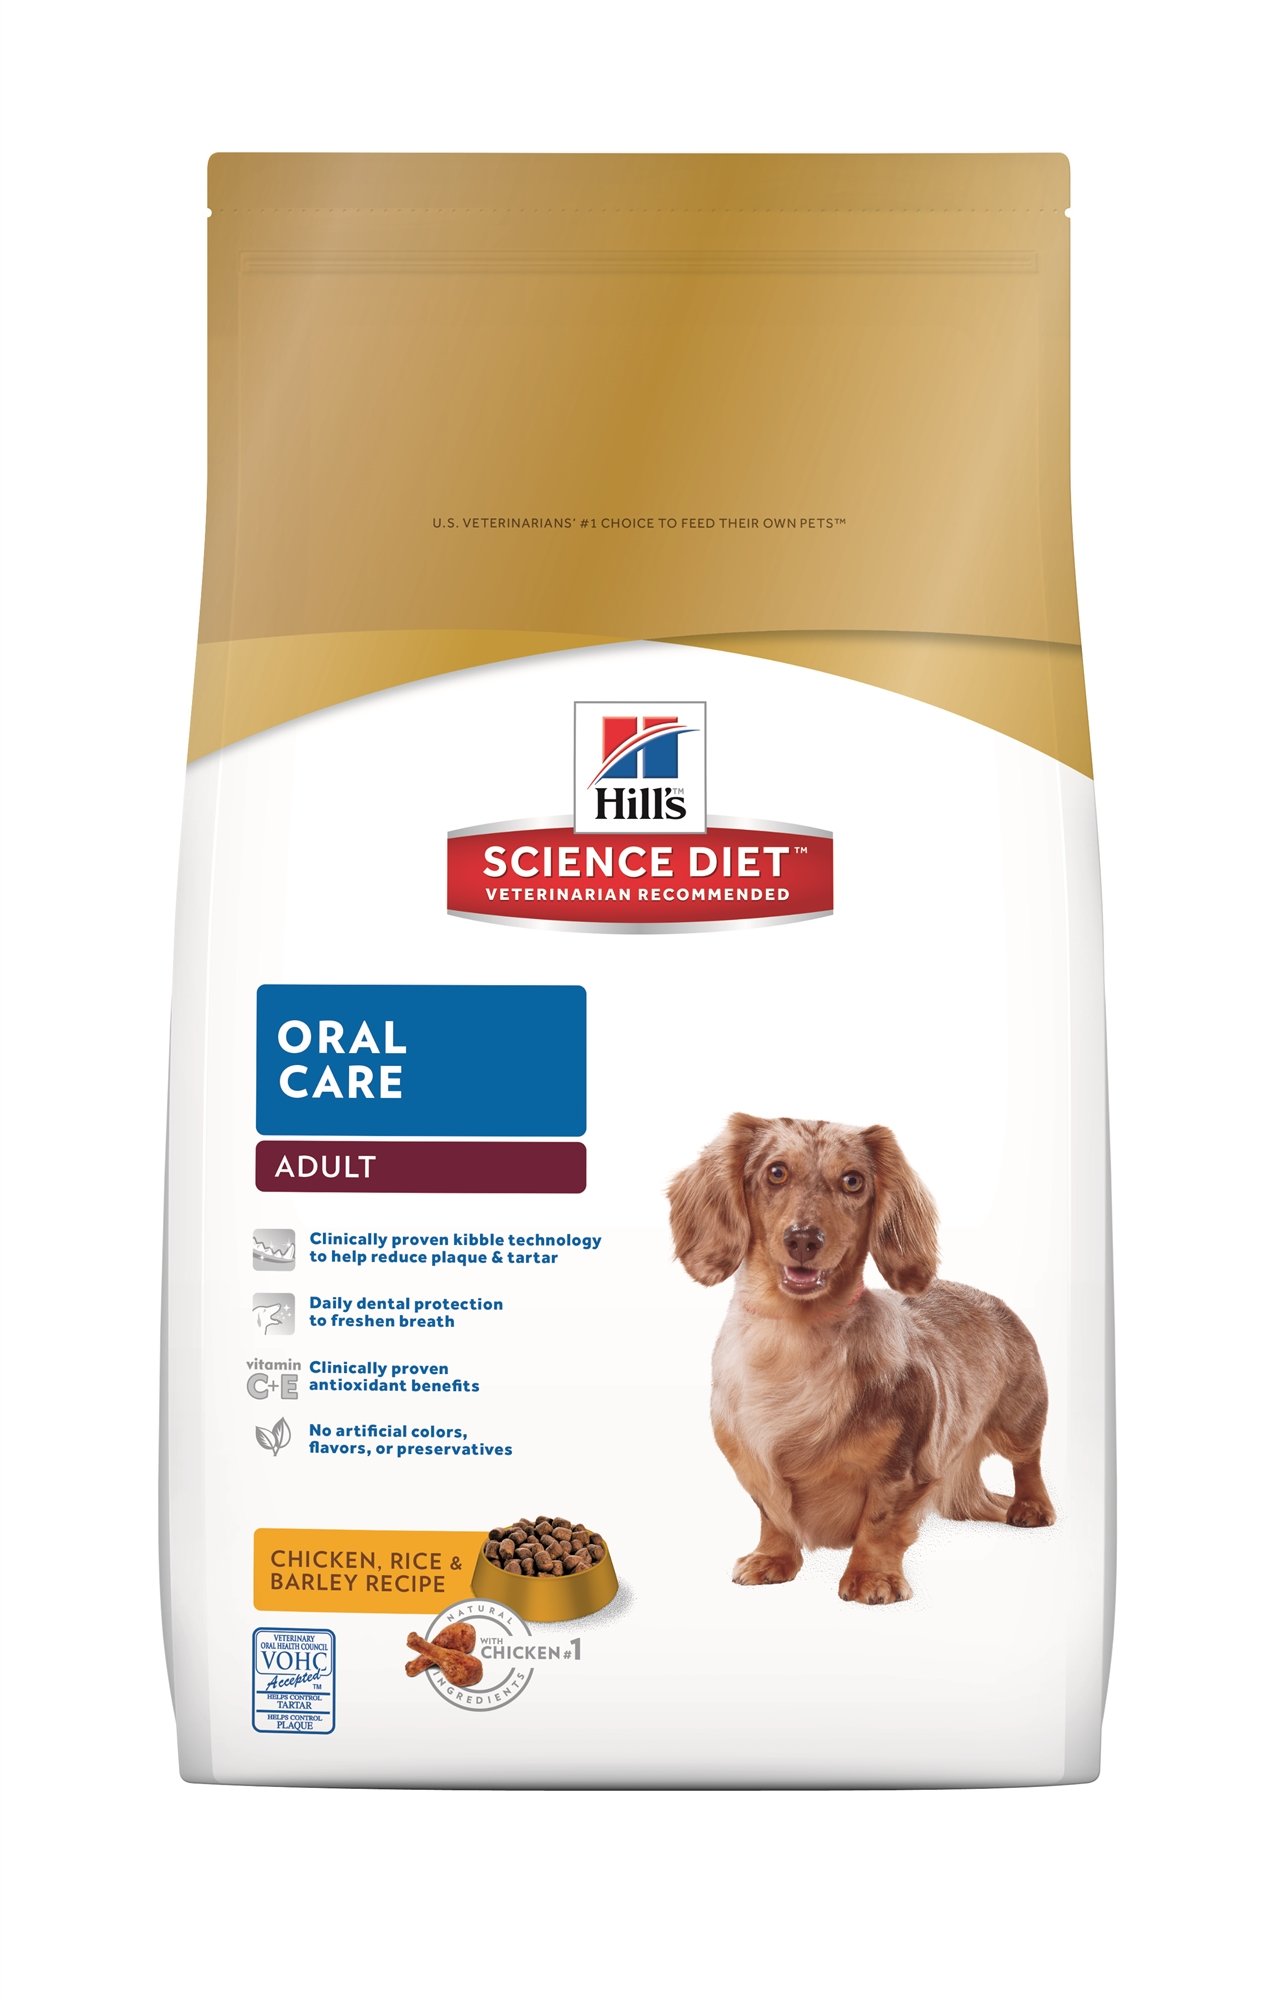 15LB SCIENCE DIET ORAL CARE DRY DOG FOOD